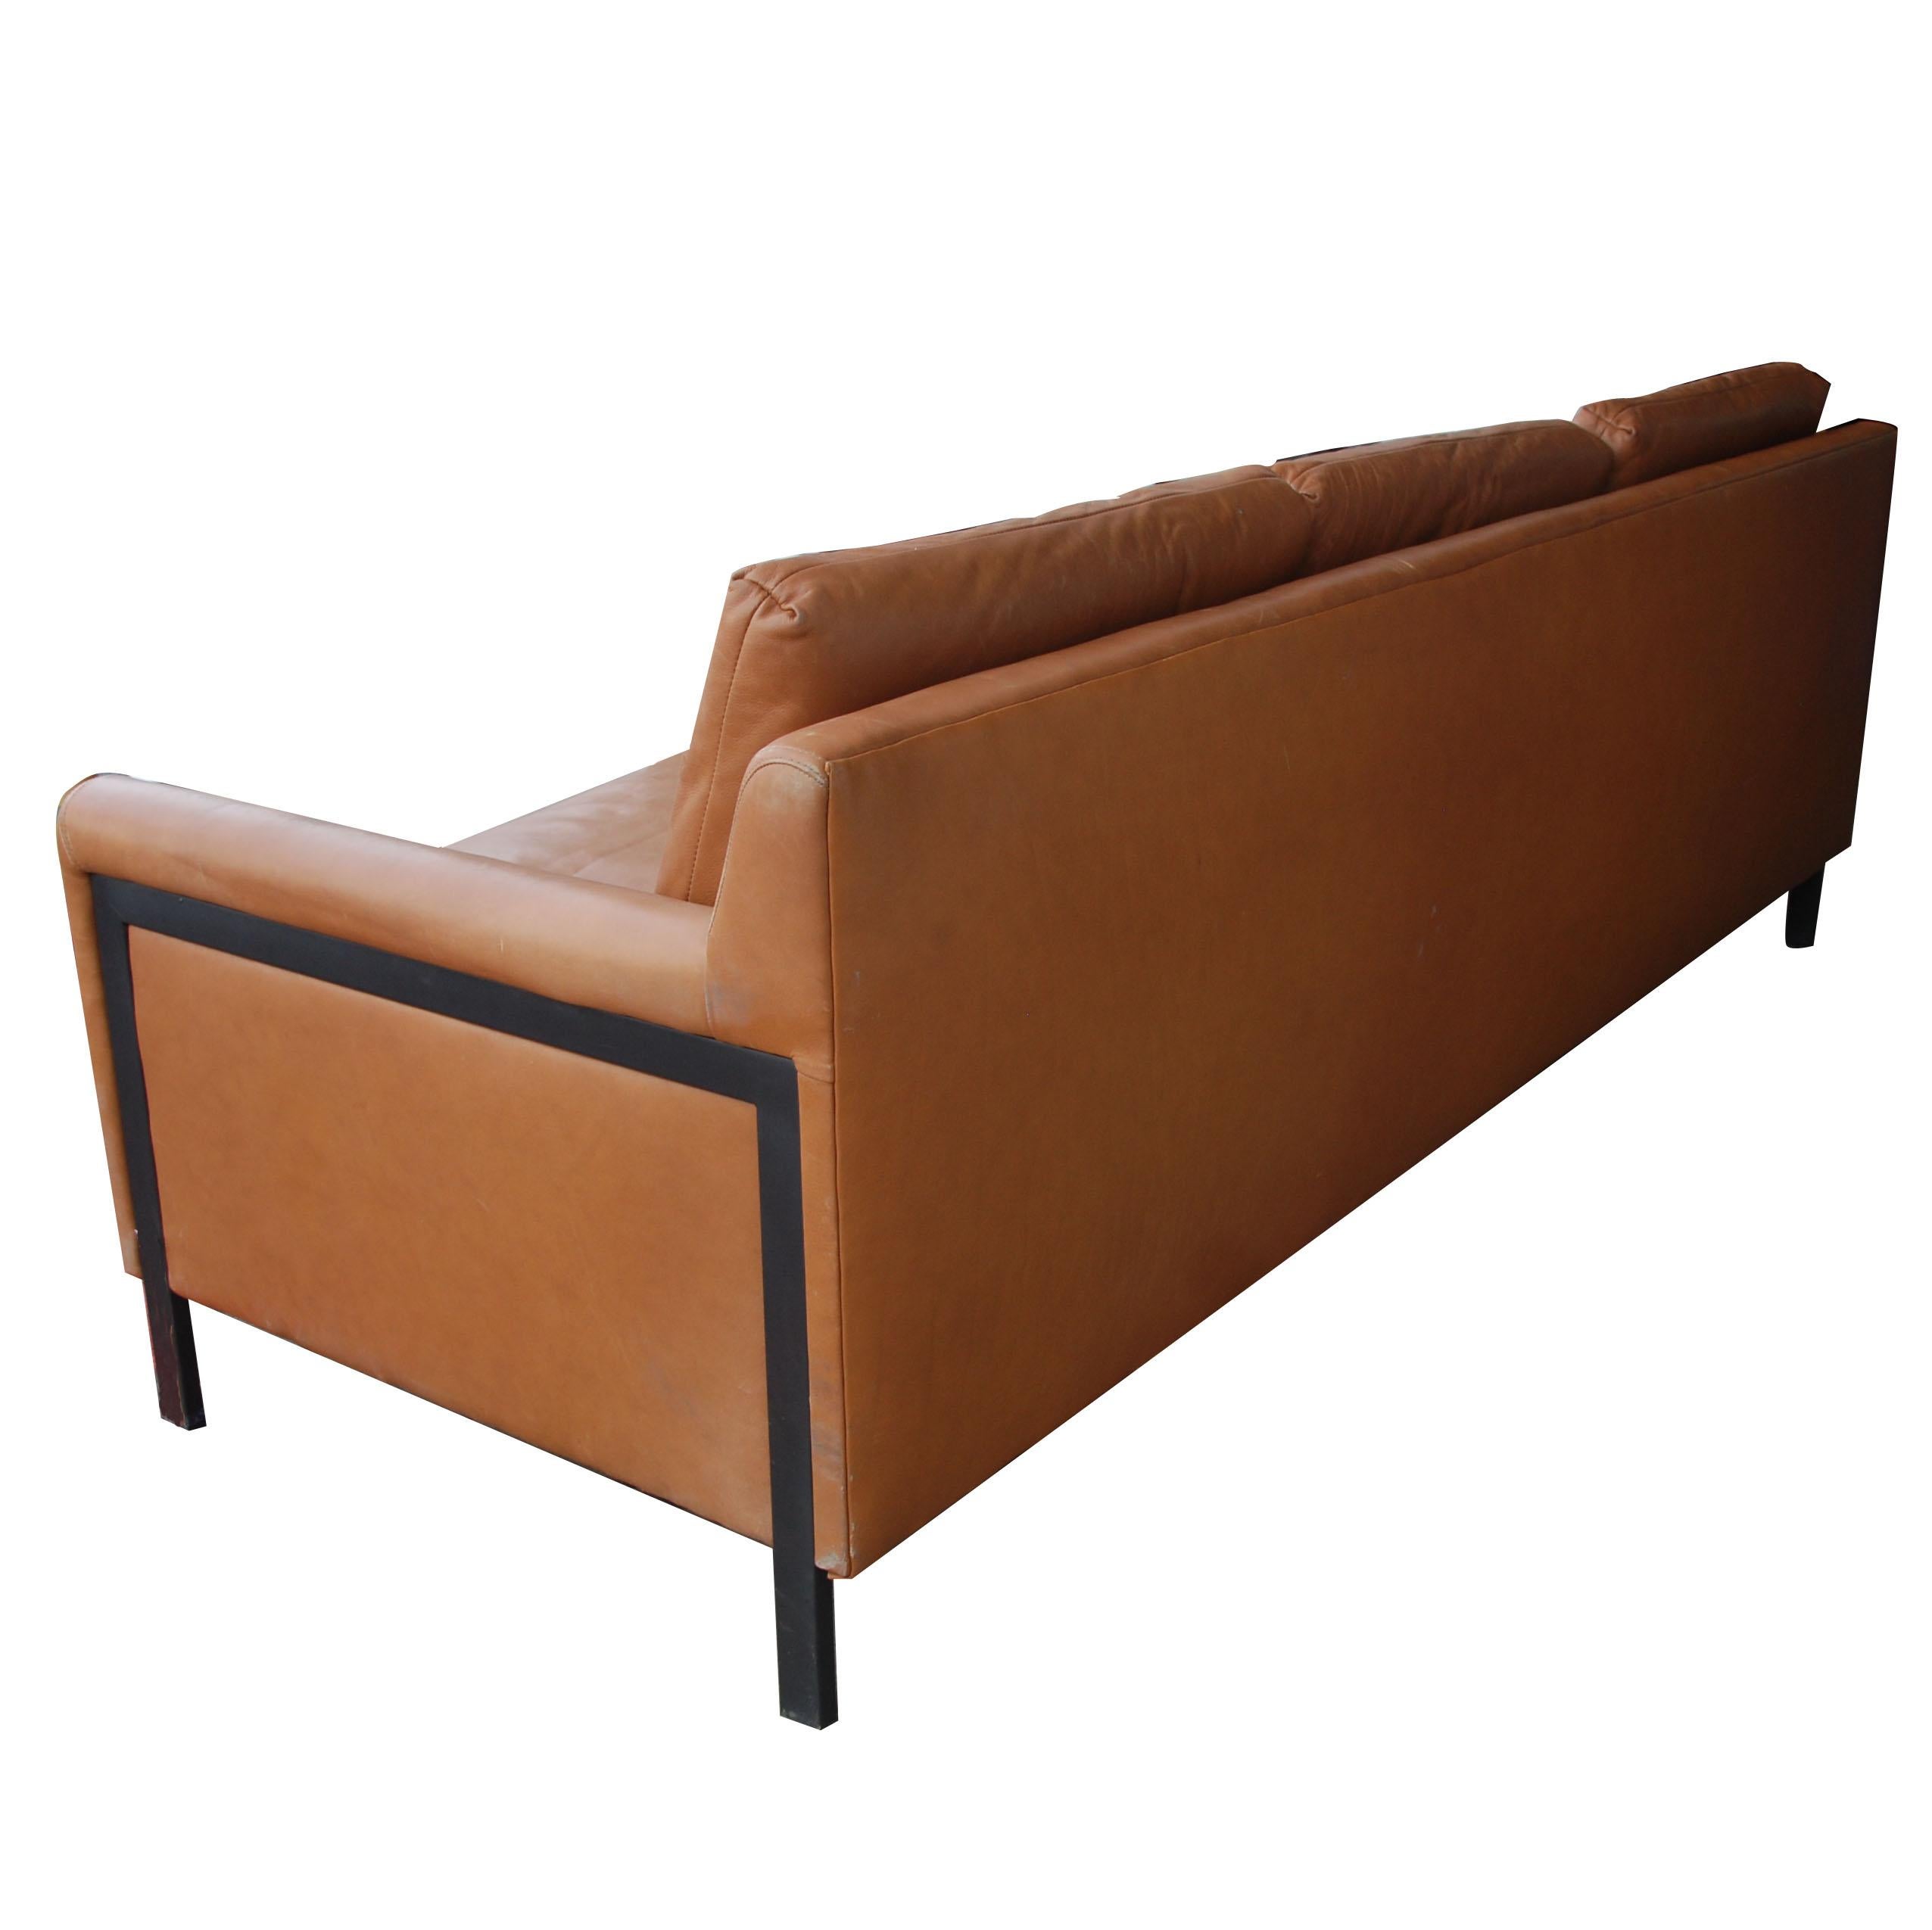 Milo Baughman style leather sofa

Caramel leather with a bronze-plated metal frame. Nicely aged leather.
 